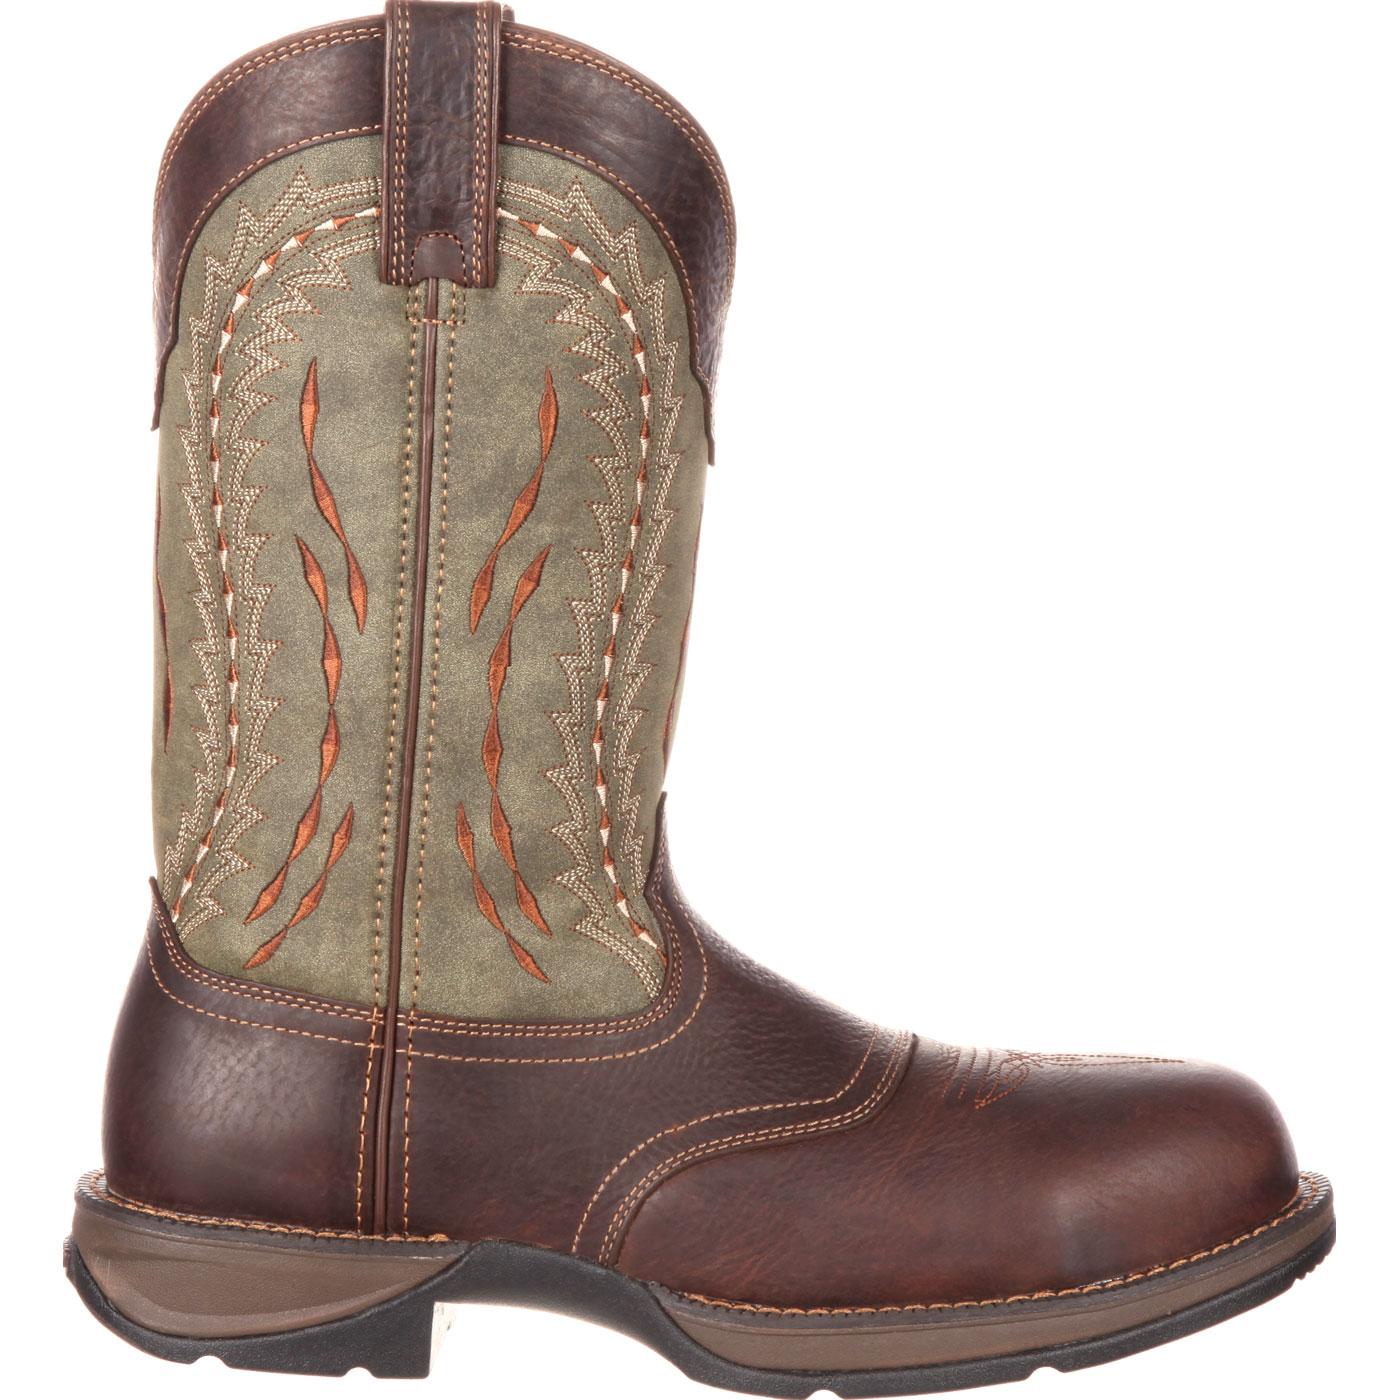 #DDB0107, Rebel by Durango Composite Toe Saddle Western Boot